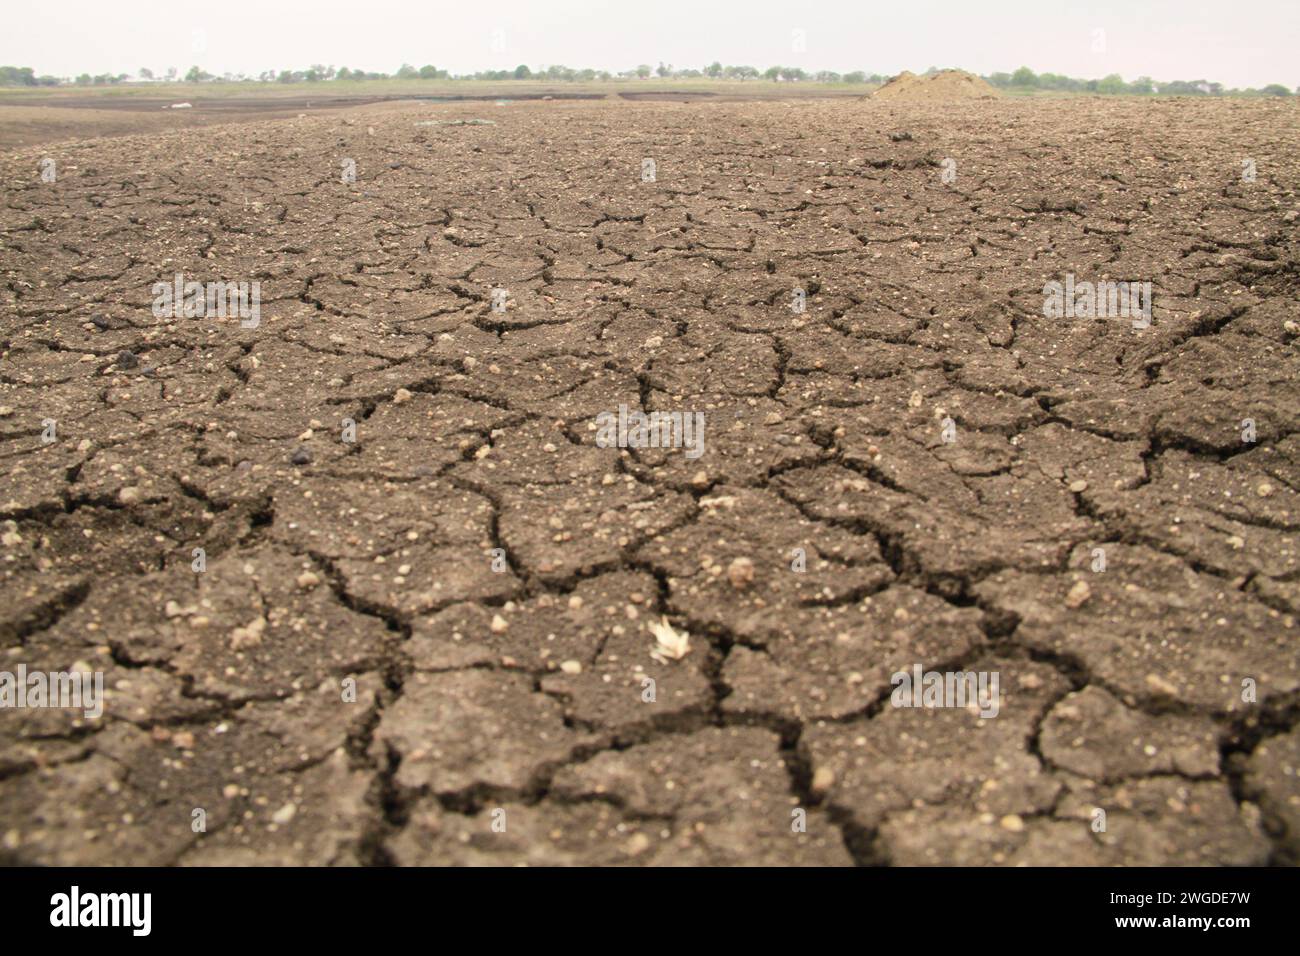 The Warapgaon village, located in Beed district’s Ambajogai taluka, was in the grip of a deadly drought in 2015. Residents either had to walk long distances to fetch water or were dependent on tankers. That year, Beedrecorded only 297mm of rainfall while the state average stood at 678mm. Ambajogai, Maharashtra. India. Stock Photo